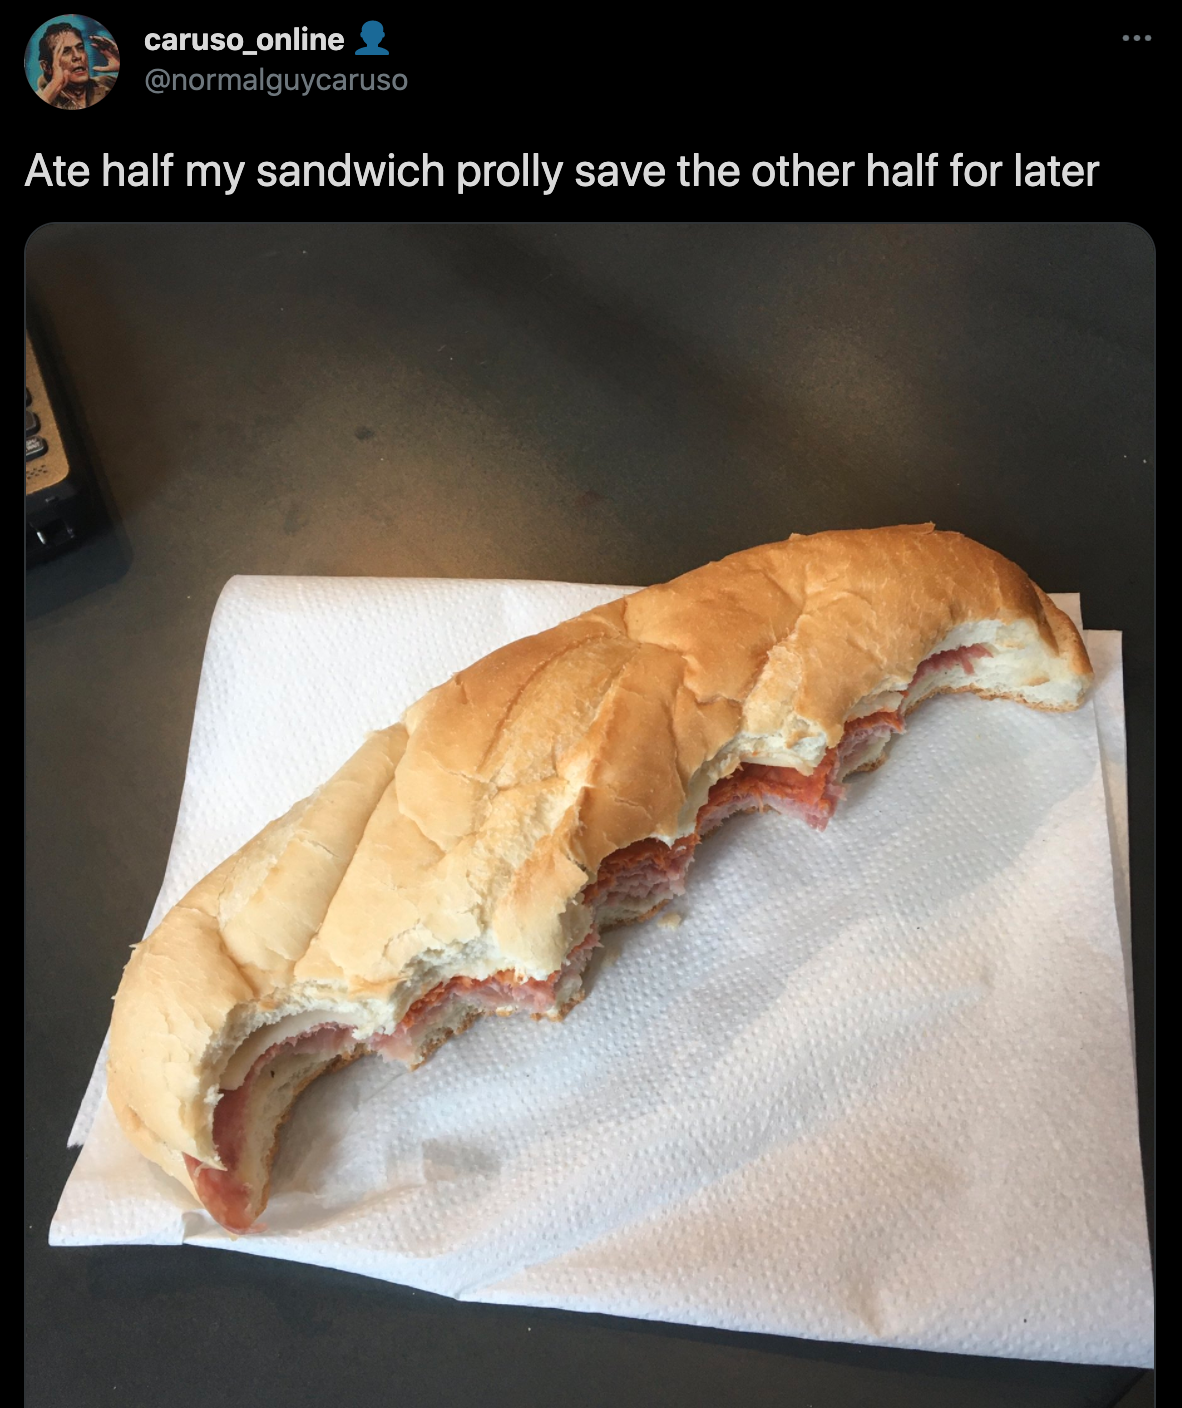 funny twitter jokes - Ate half my sandwich prolly save the other half for later